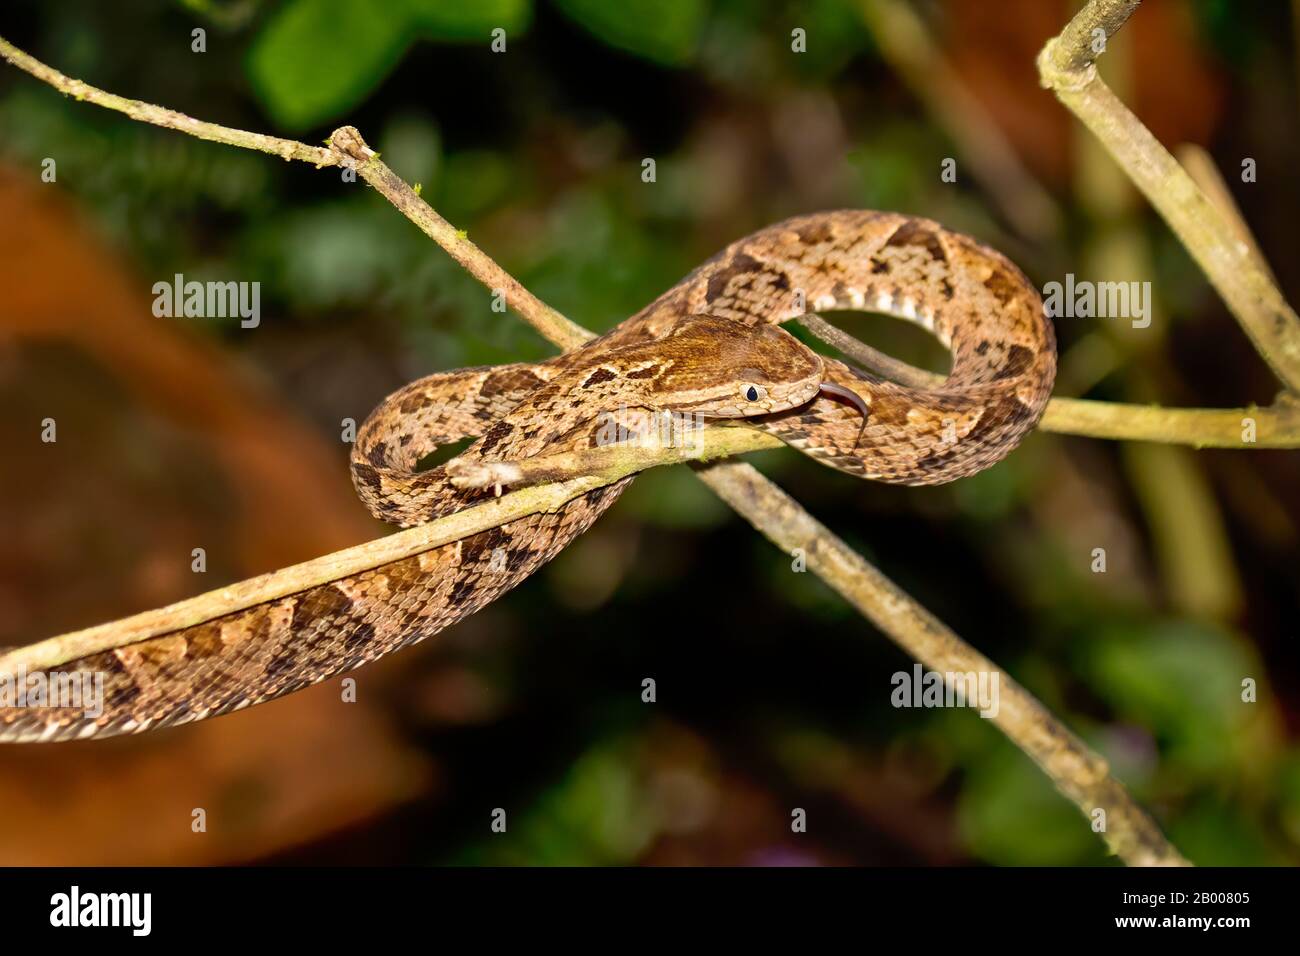 The Fer-de-lance (Bothrops asper) is a highly venomous pit viper. Members of this genus are responsible for more human deaths in the Americas than any Stock Photo